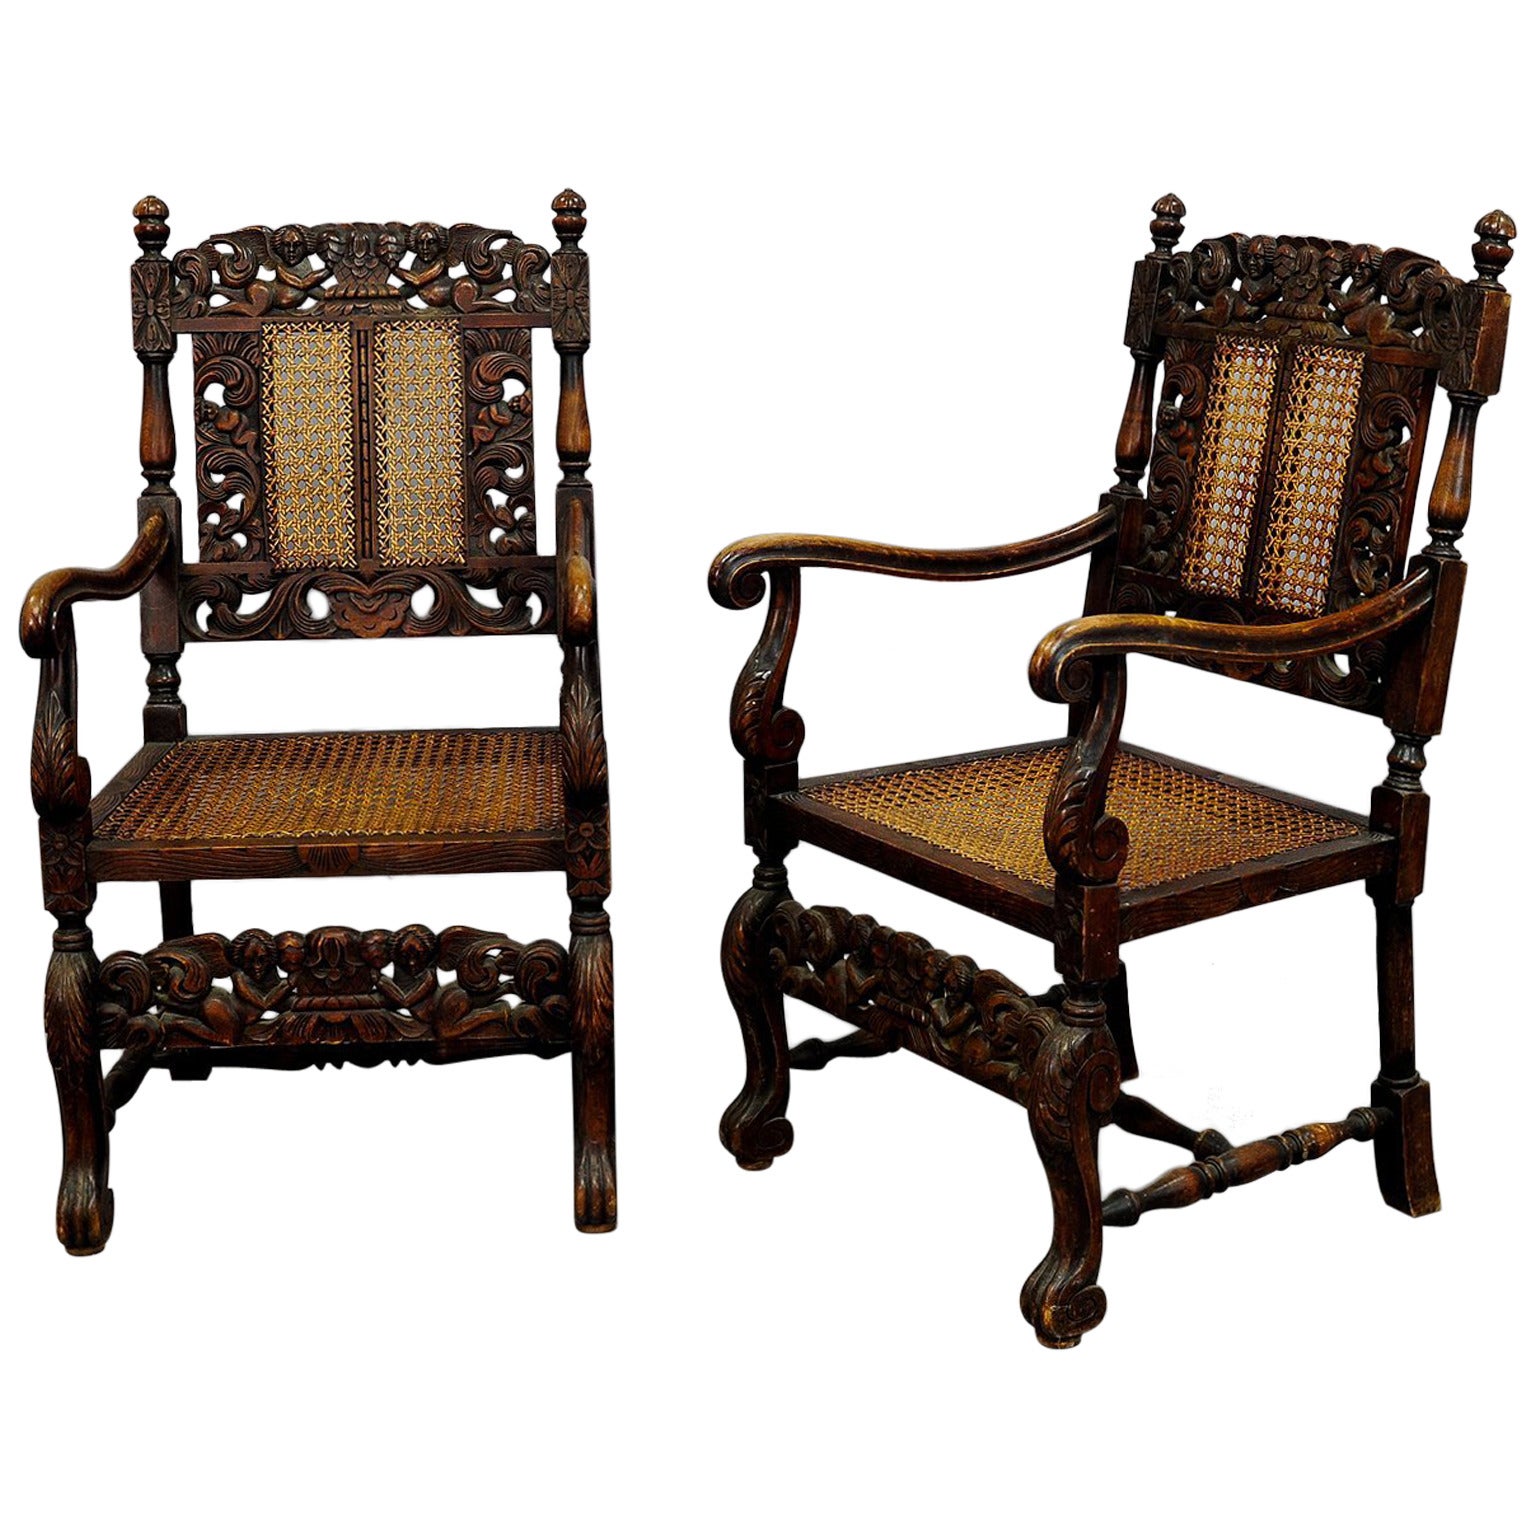 Pair of Carved Wood Armchairs with Great Cherub Carvings, circa 1900